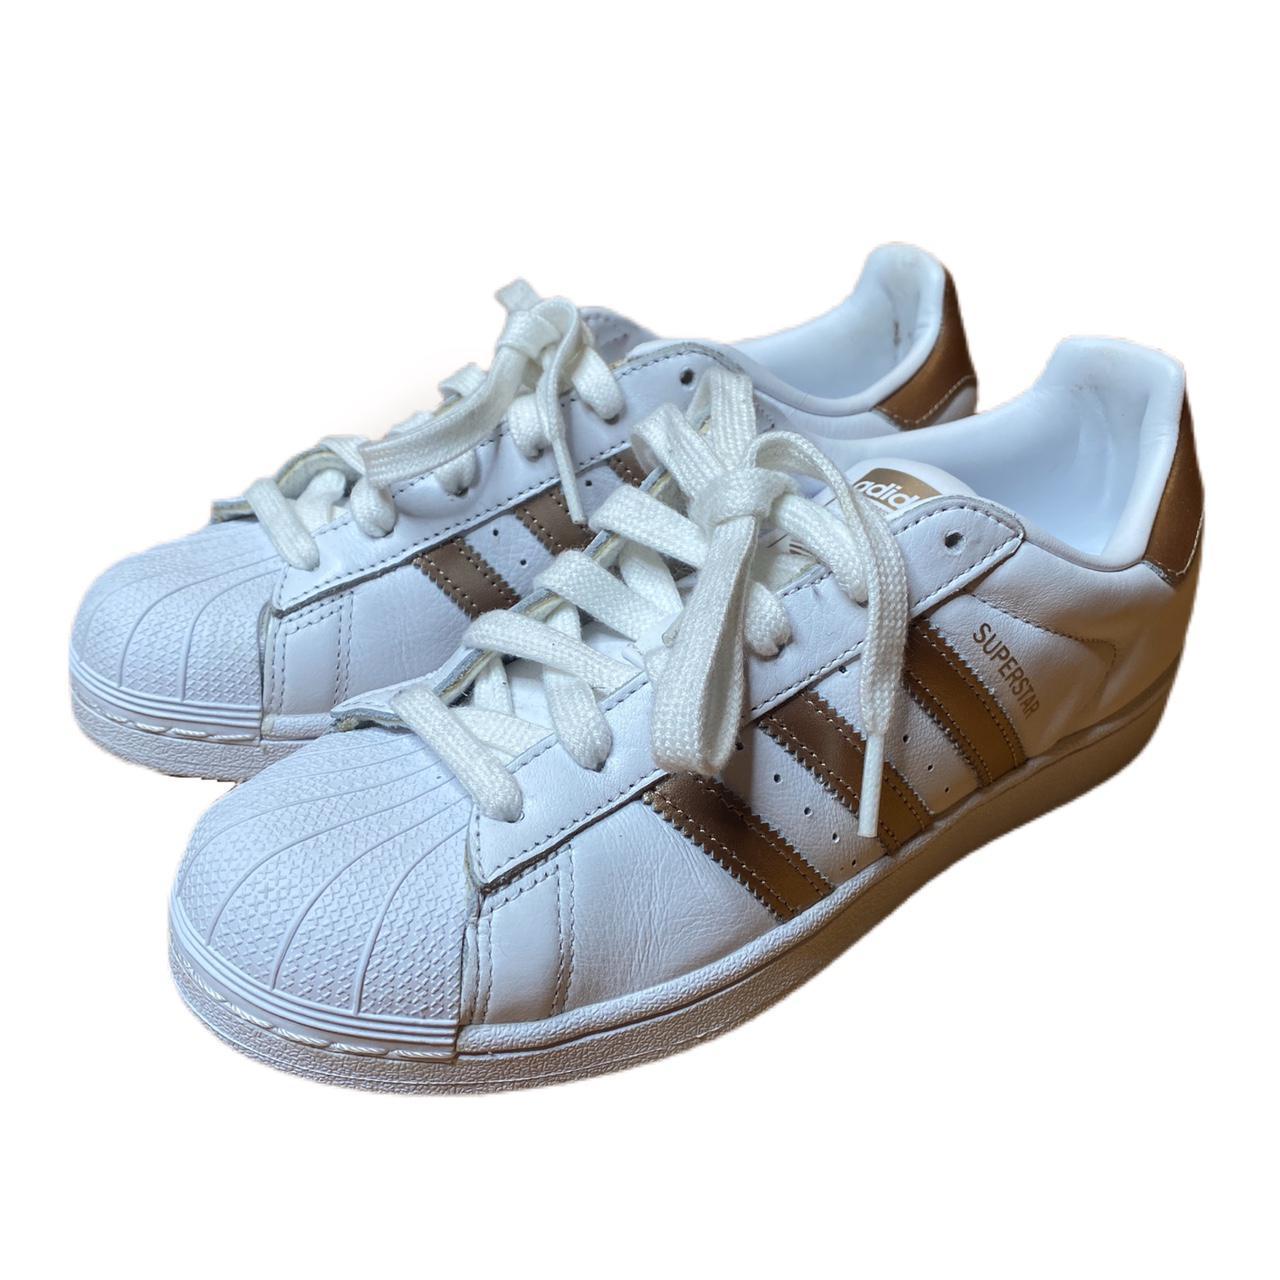 Product Image 2 - Adidas superstar white and gold